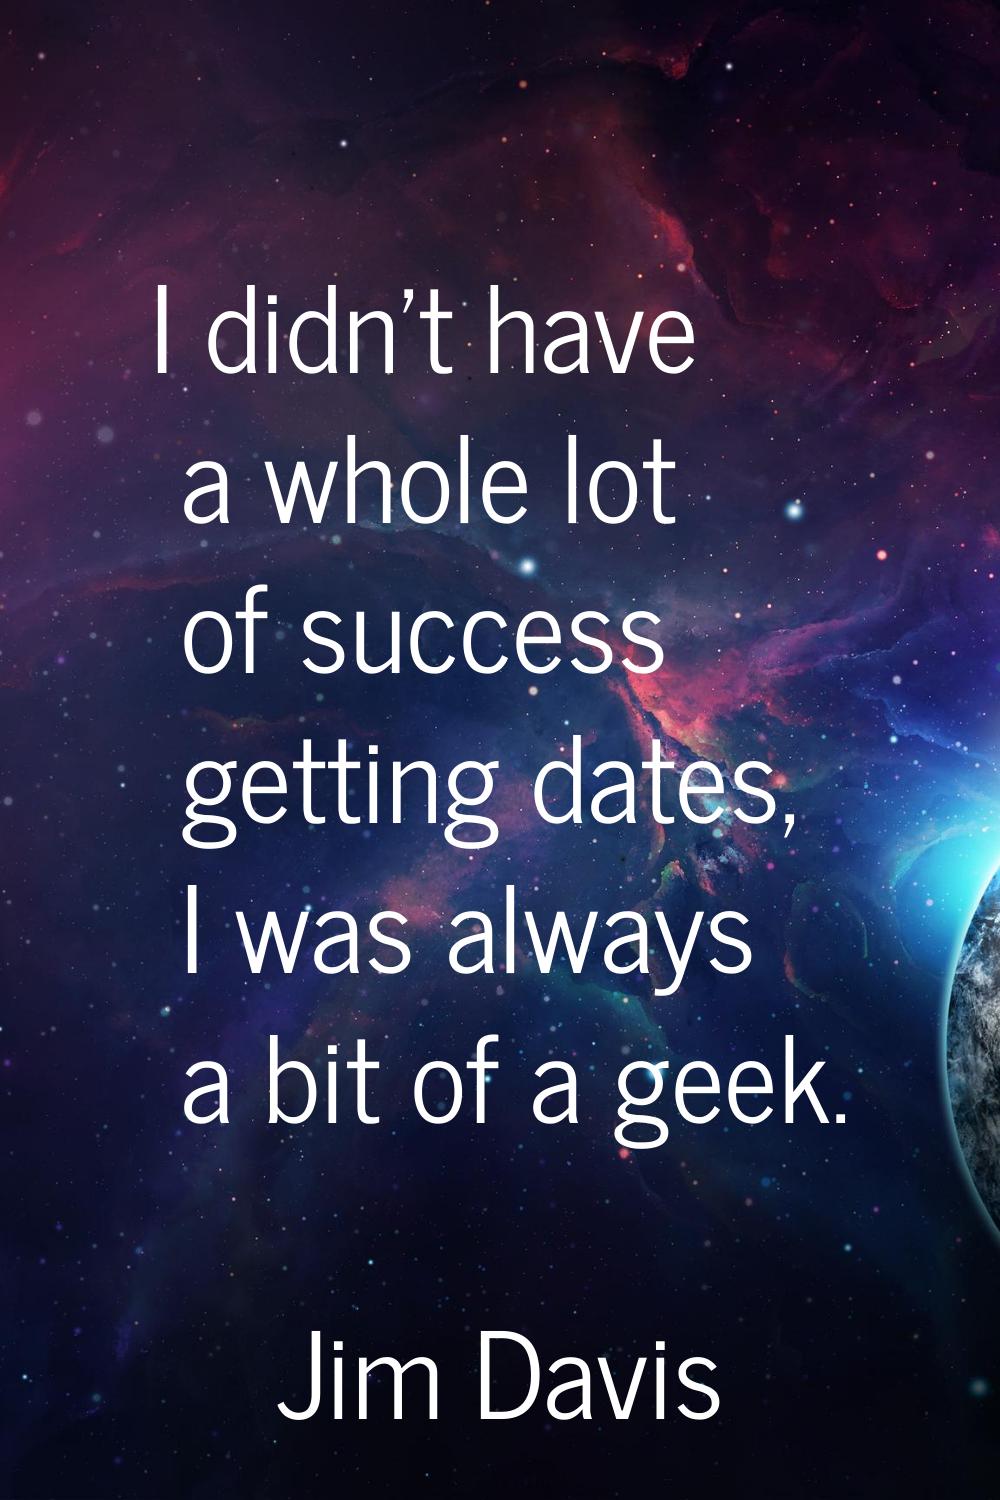 I didn't have a whole lot of success getting dates, I was always a bit of a geek.